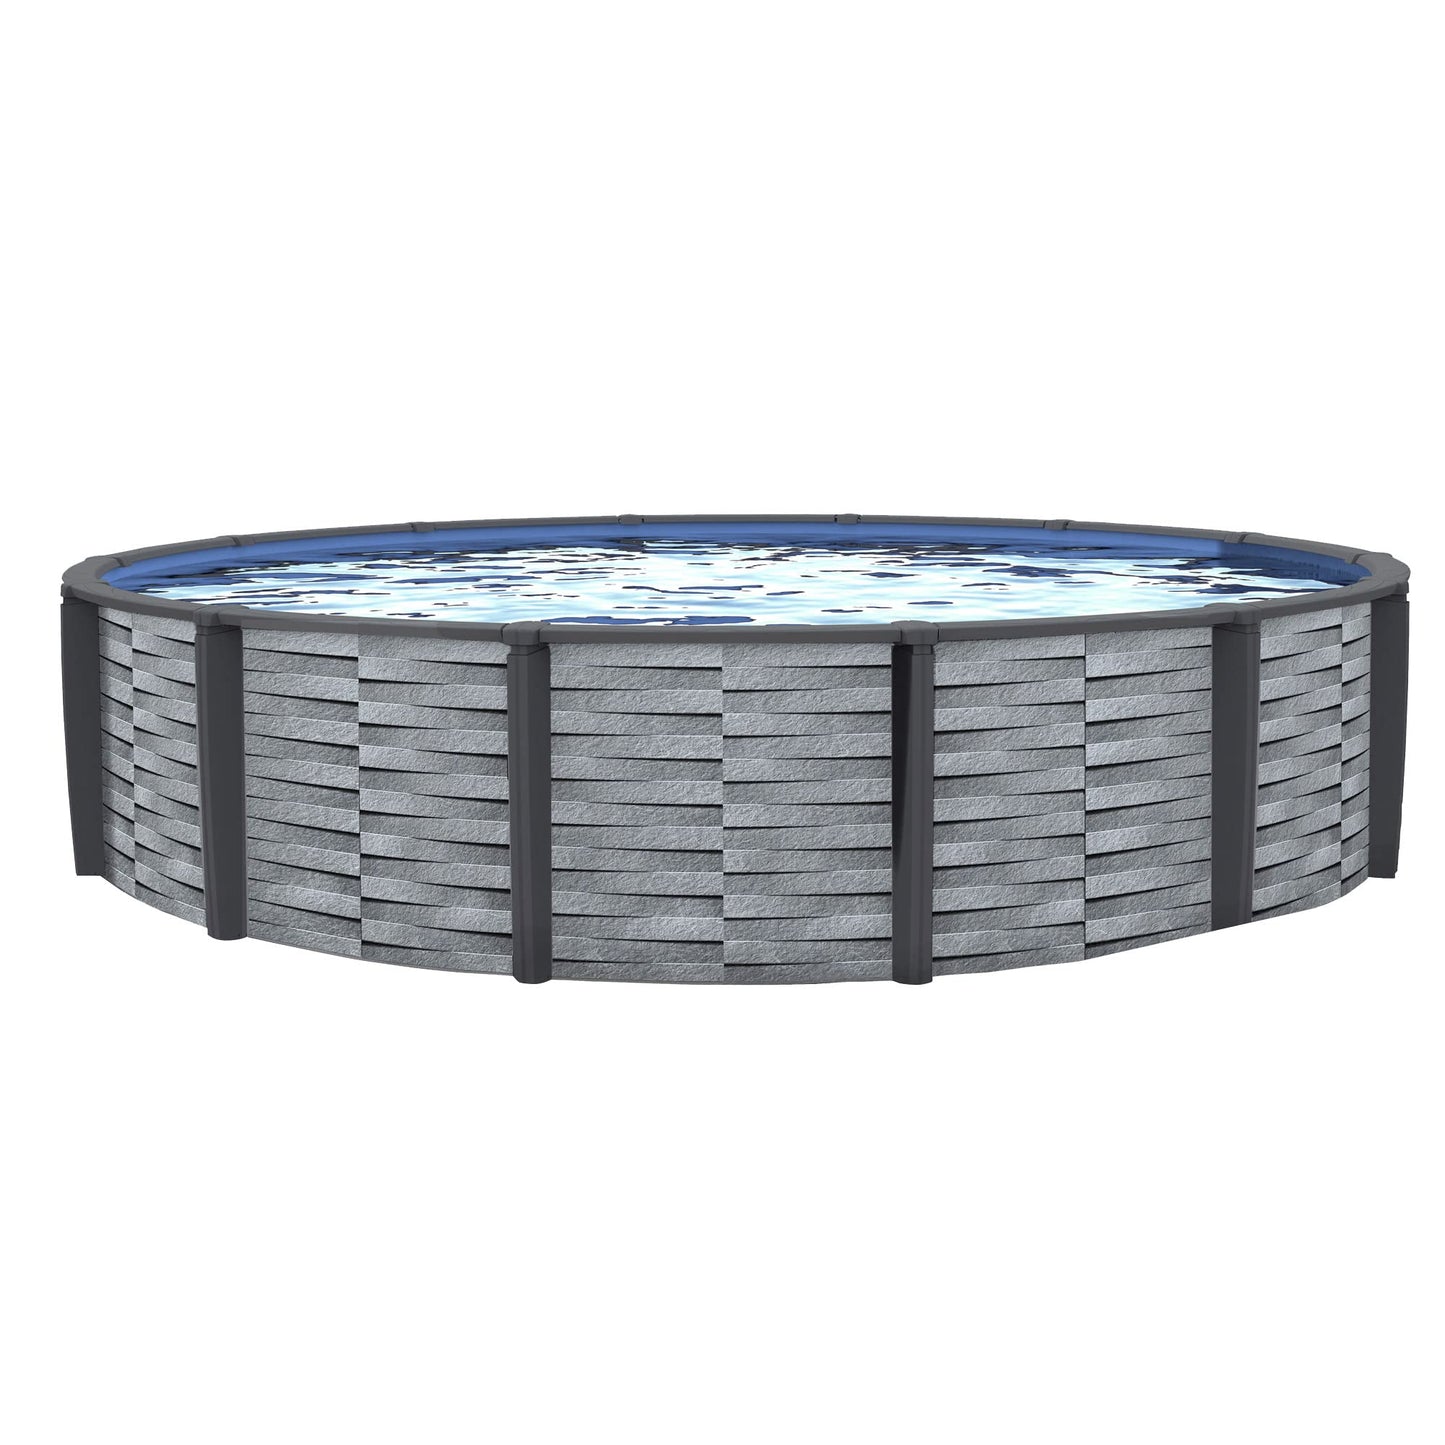 Blue Wave NB19834 Affinity 24-ft Round 52-in Deep 7-in Top Rail Resin Package Above Ground Swimming Pool, x, Gray